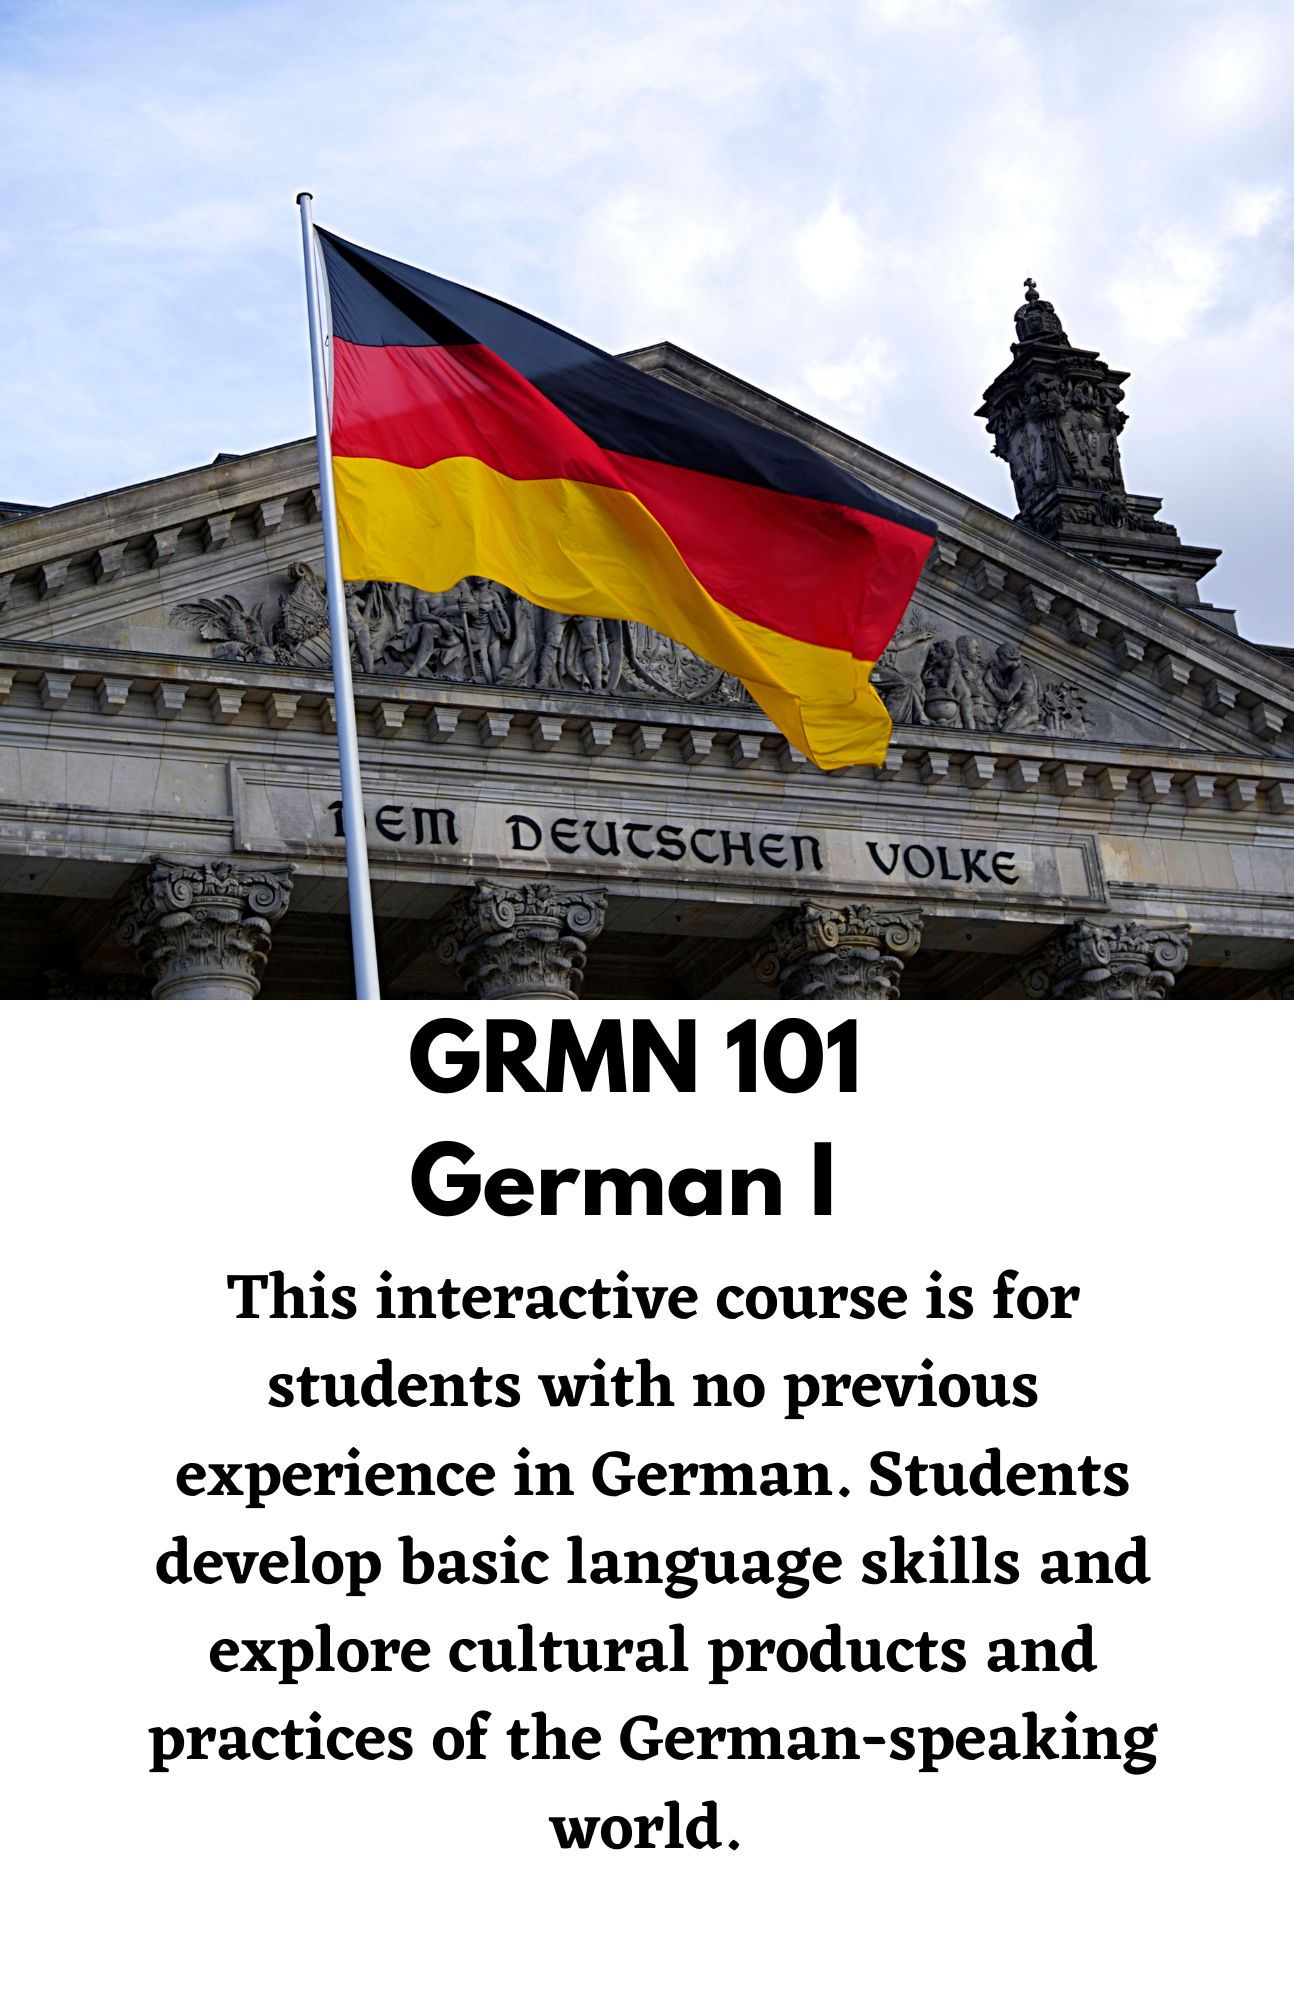 GRMN 101  German I. This interactive course is for students with no previous experience in German. Students develop basic language skills and explore cultural products and practices of the German-speaking world.